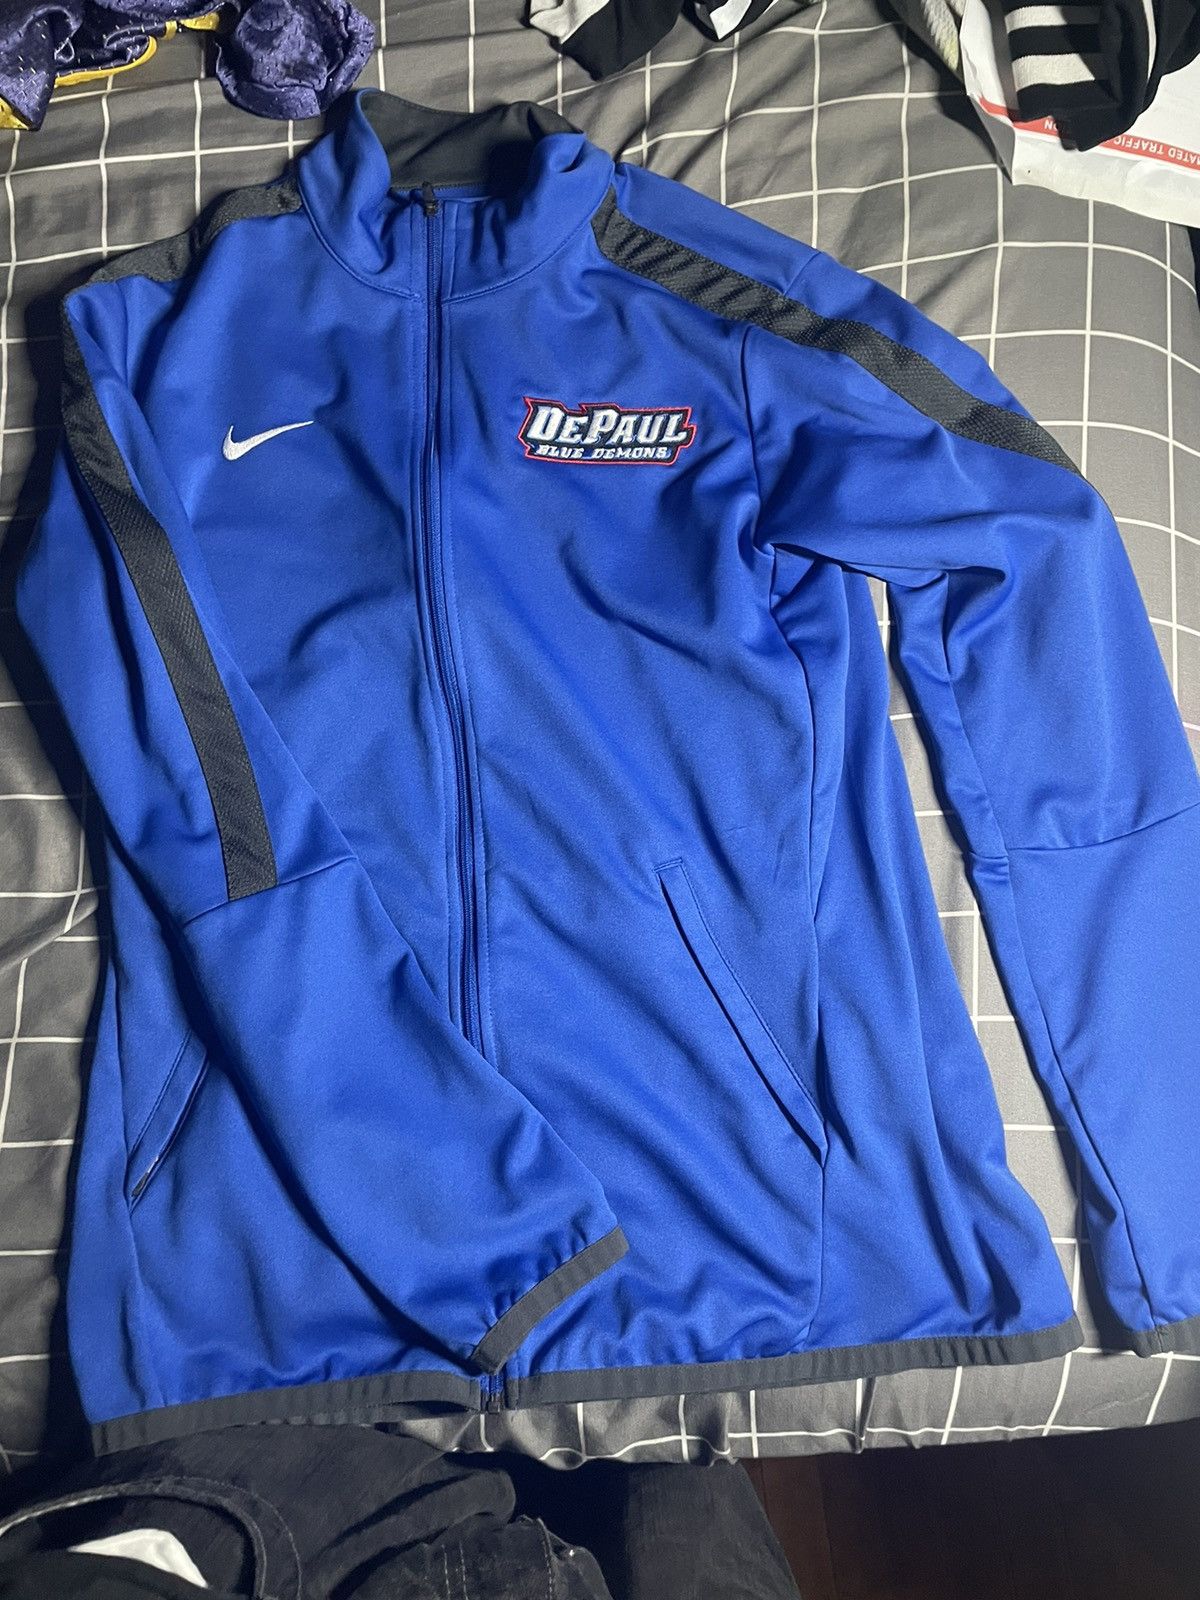 Nike depaul warm up Size US S / EU 44-46 / 1 - 2 Preview